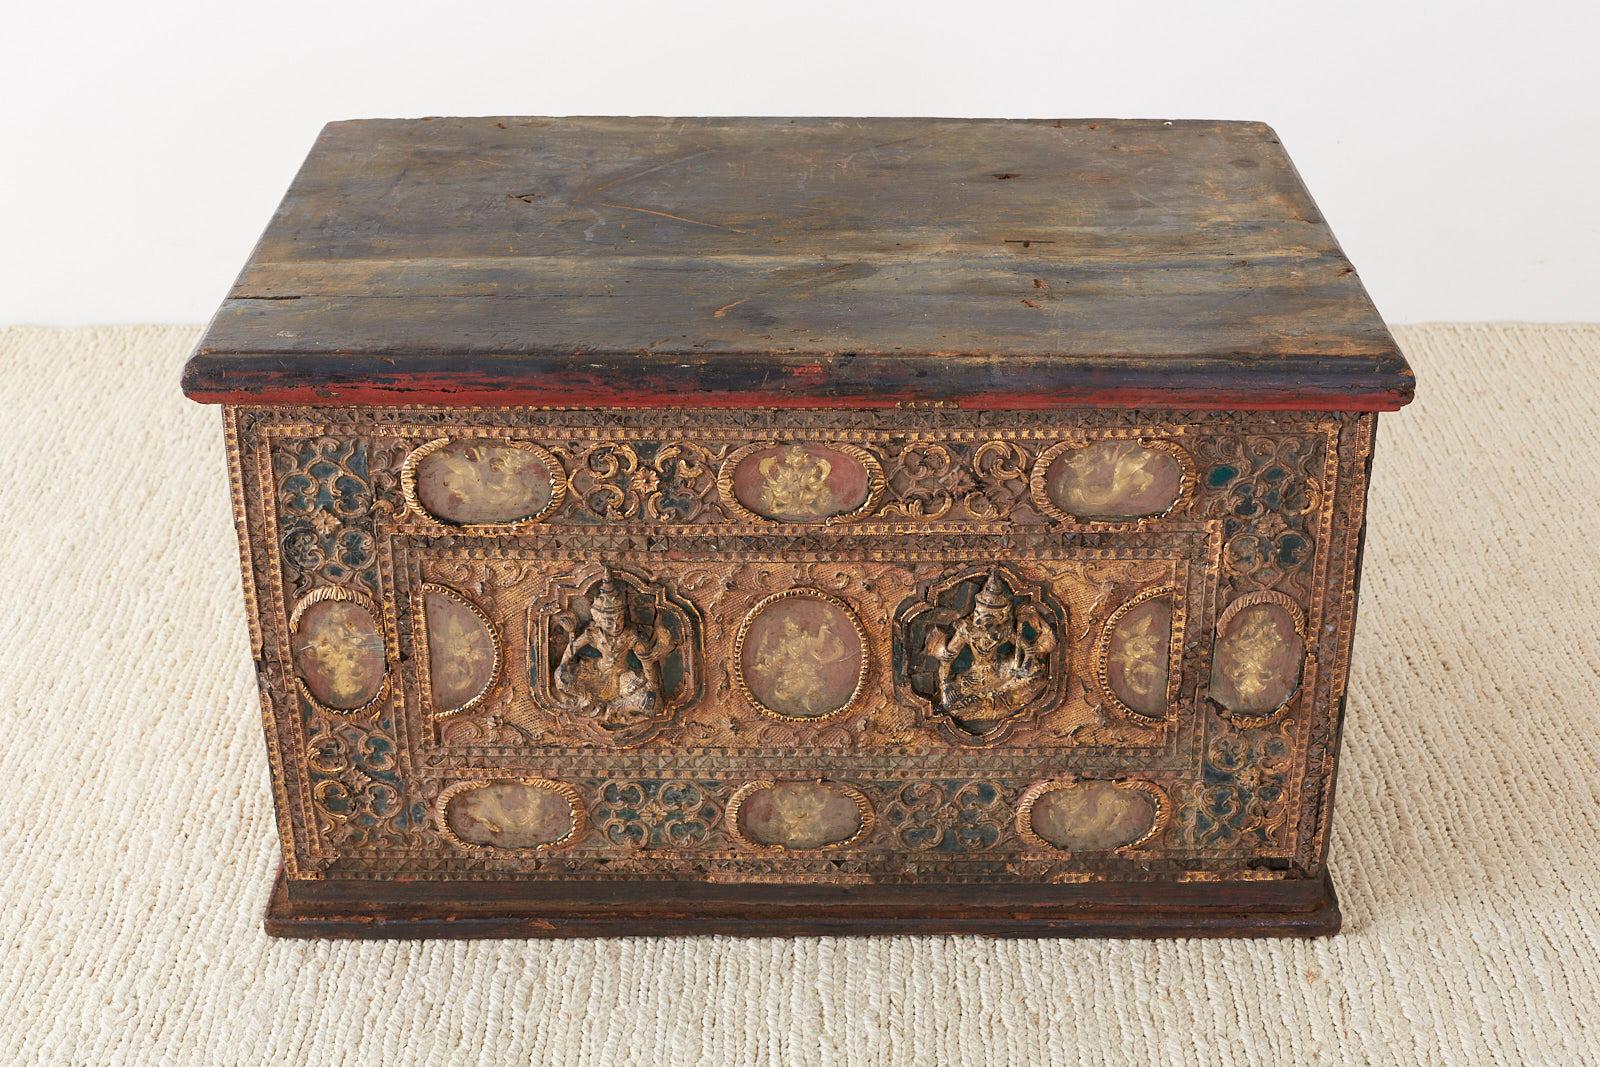 19th Century Burmese Mandalay Gilt Chest or Trunk In Distressed Condition In Rio Vista, CA